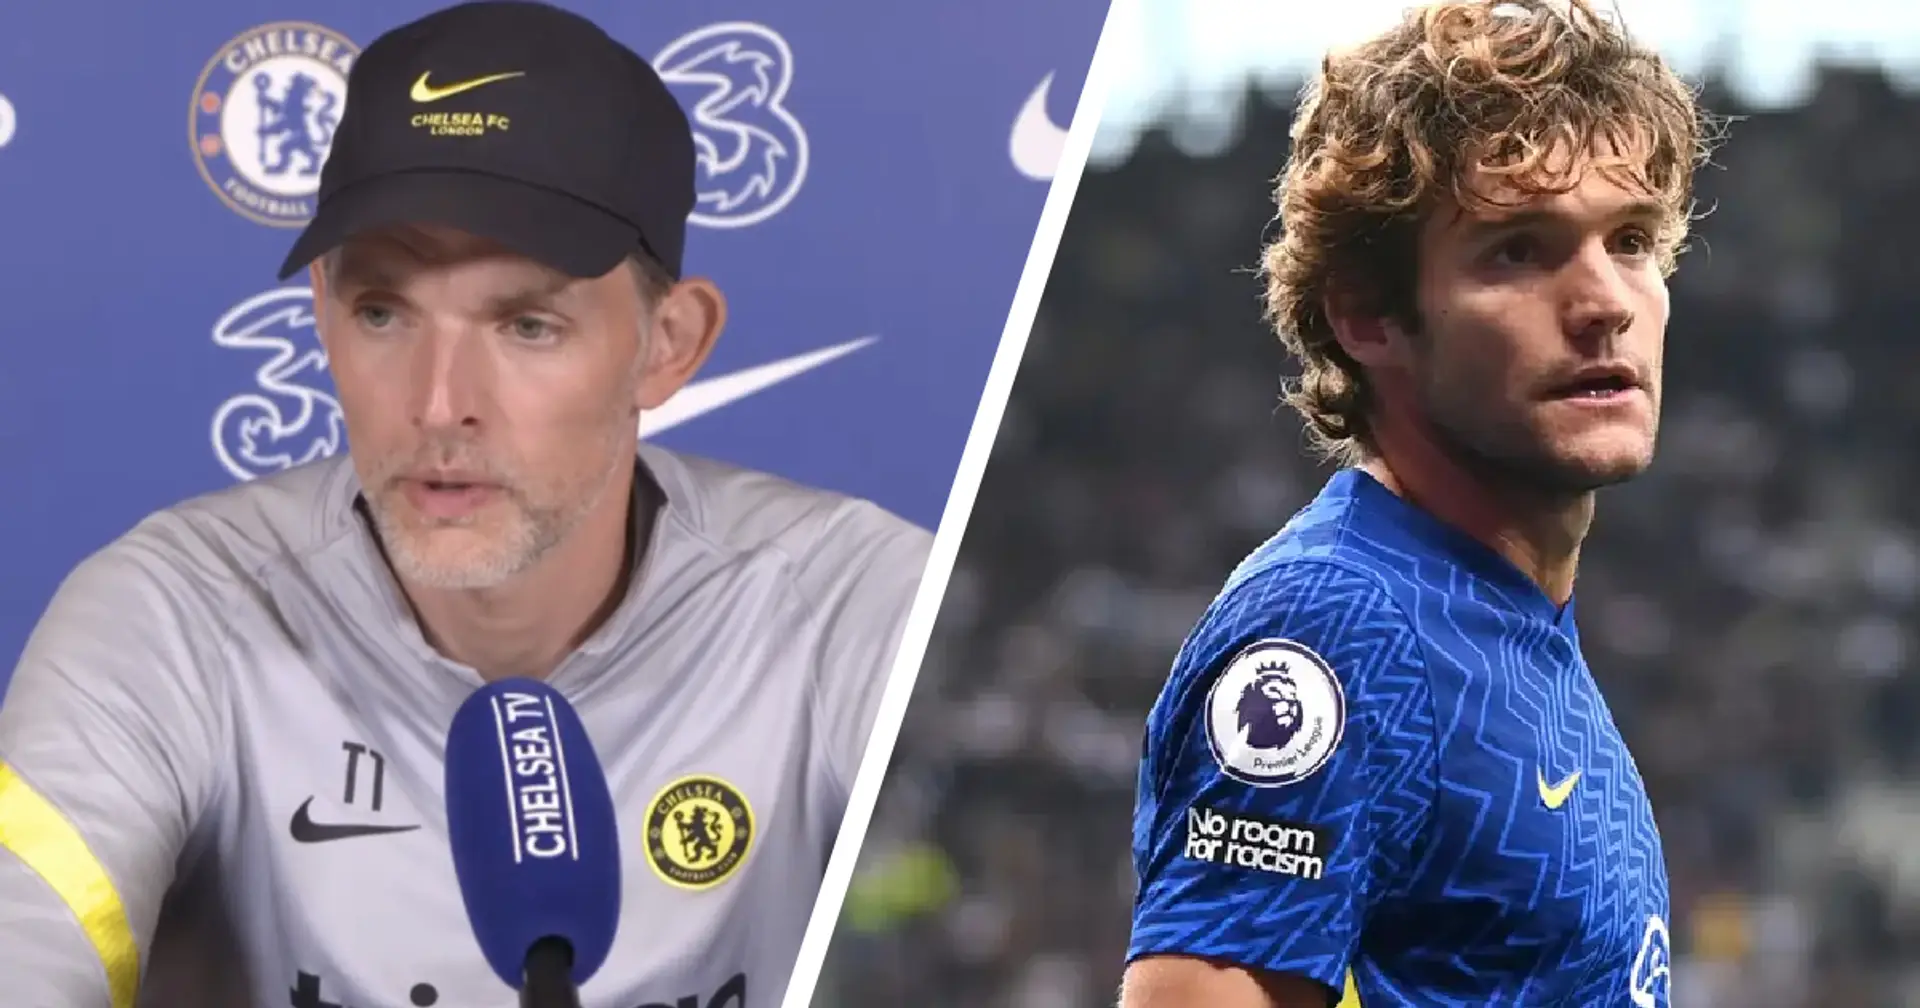 'I trust him 1000%': Tuchel's response to Marcos Alonso no longer taking a knee